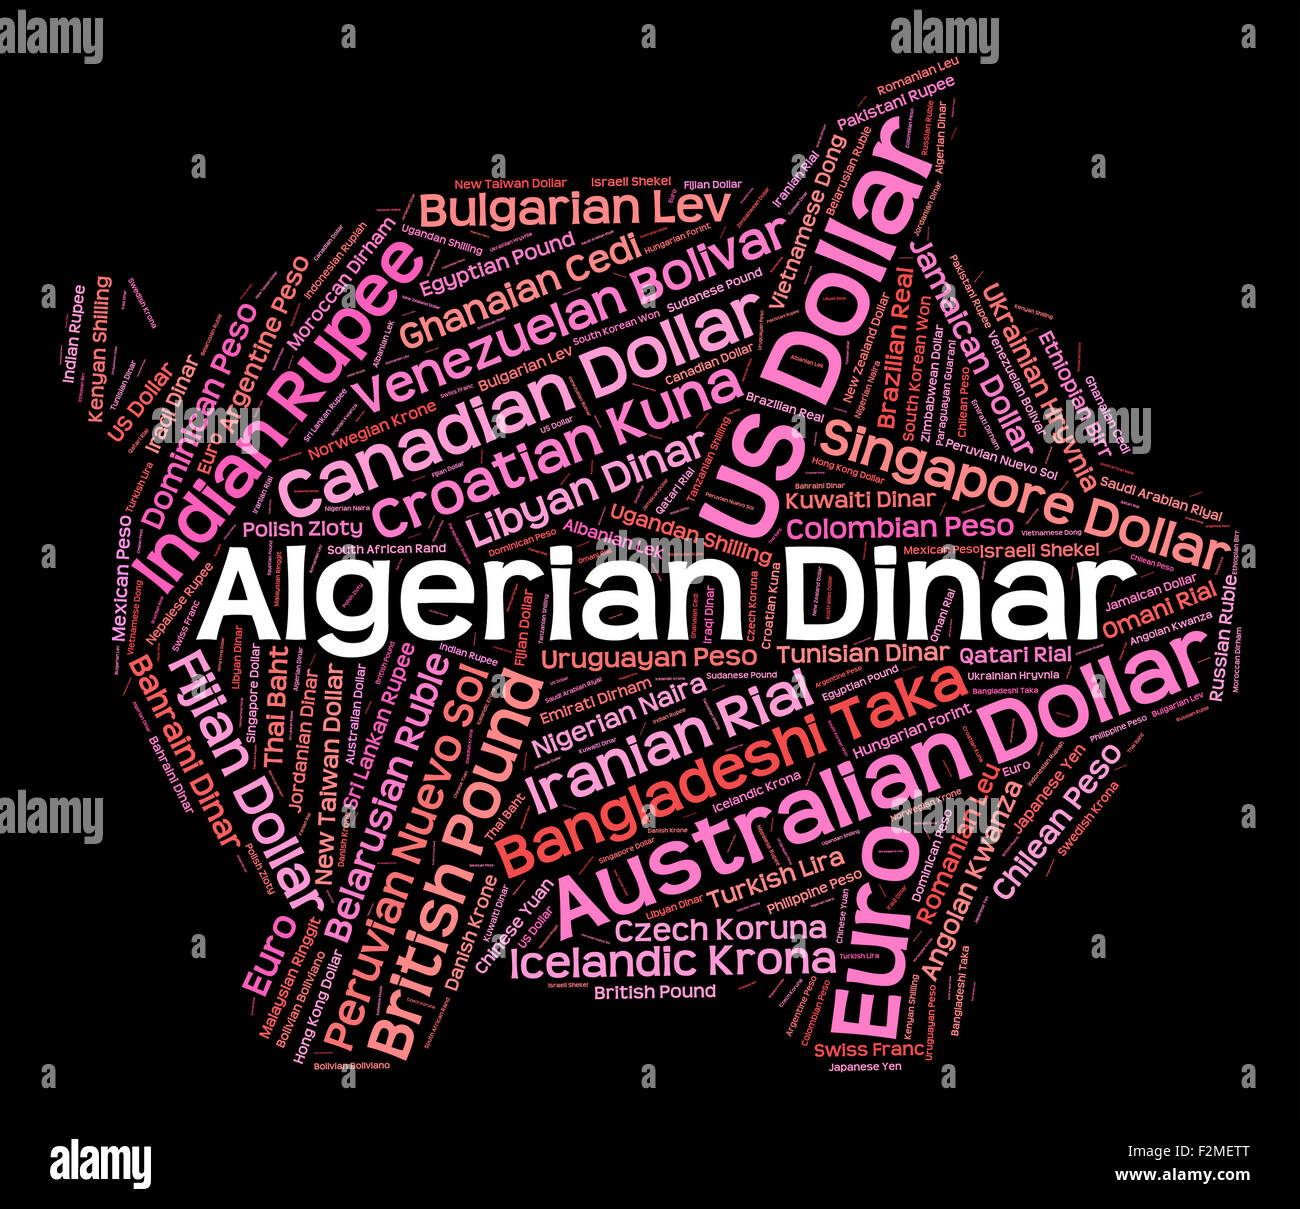 Algerian Dinar Representing Foreign Currency And Exchange Stock - 